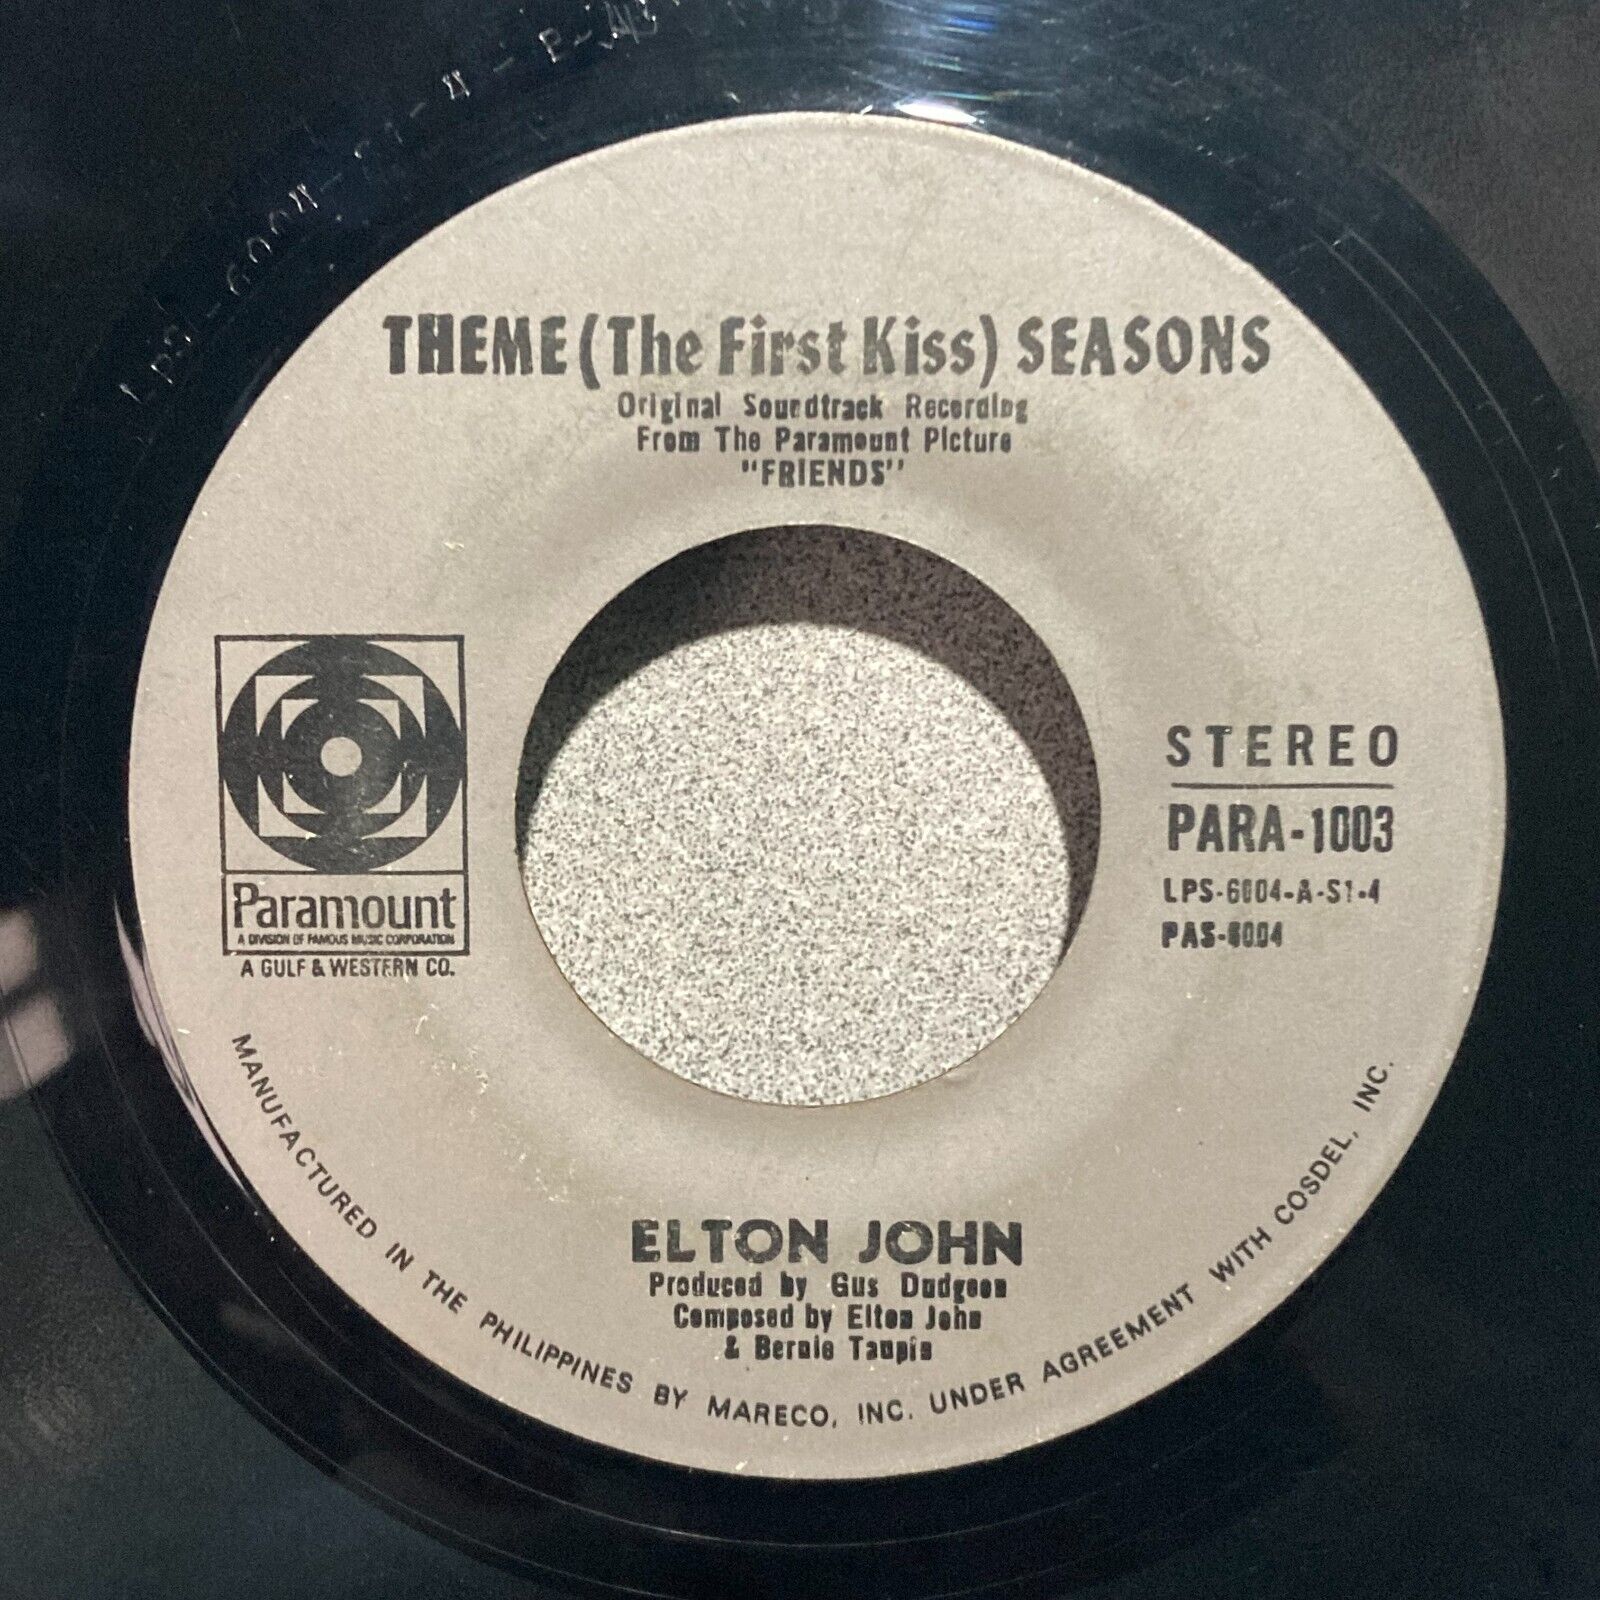 ELTON JOHN Theme (The First Kiss) Seasons / Michelle's Song PHILIPPINES 7" 45RPM